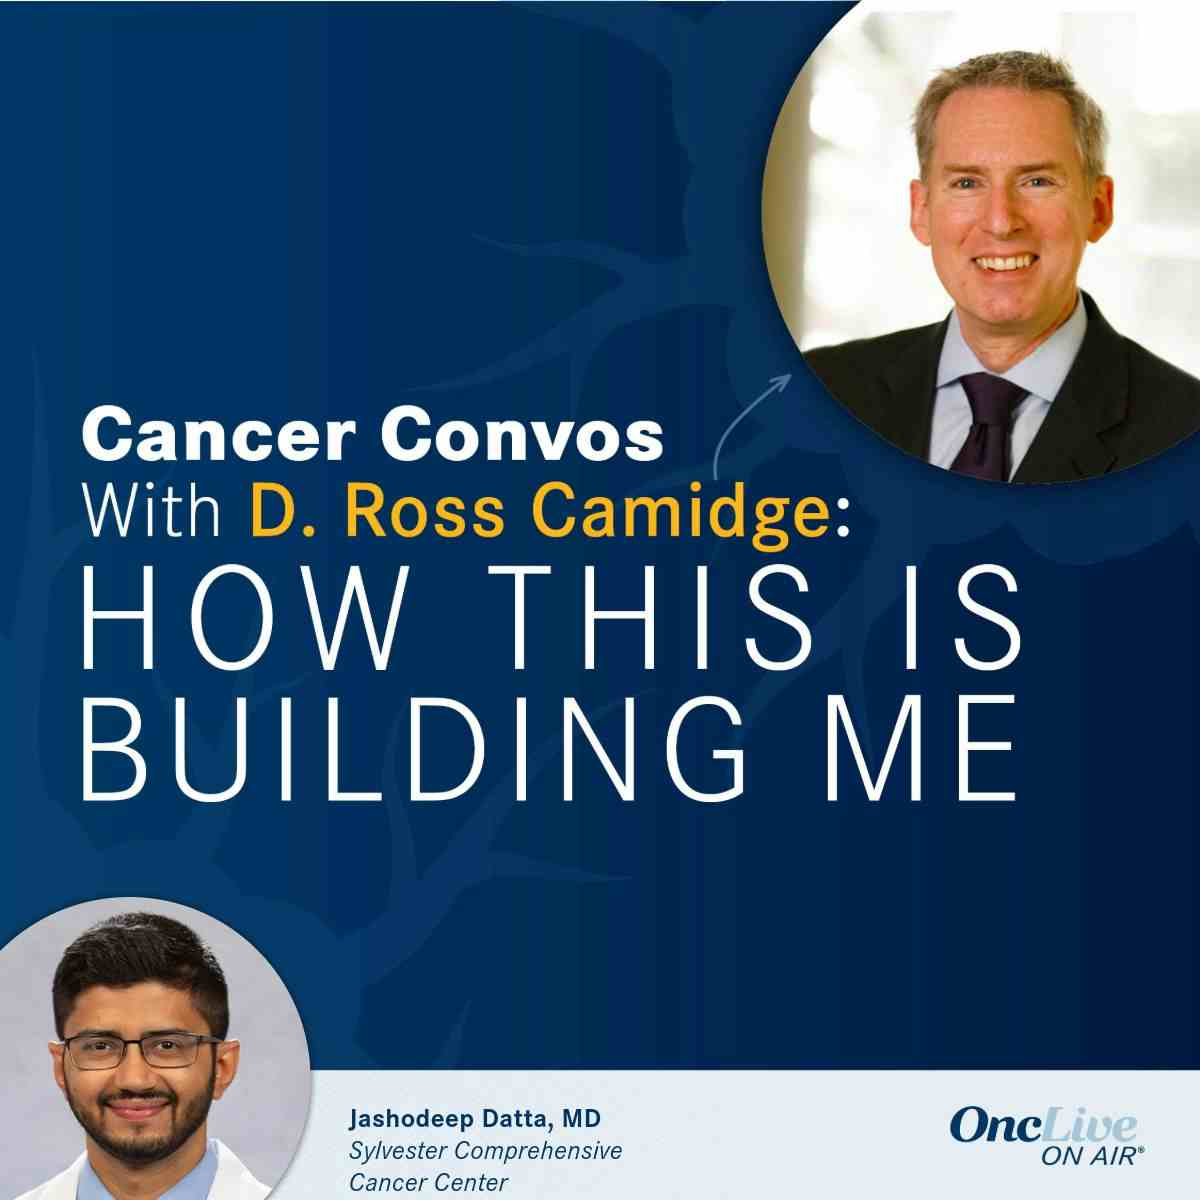 D. Ross Camidge, MD, PhD; Jashodeep Datta, MD, assistant professor, surgery, co-leader, Gastrointestinal Site Disease Group, University of Miami Sylvester Comprehensive Cancer Center, associate director, Translational Research, the Sylvester Pancreatic Cancer Research Institute